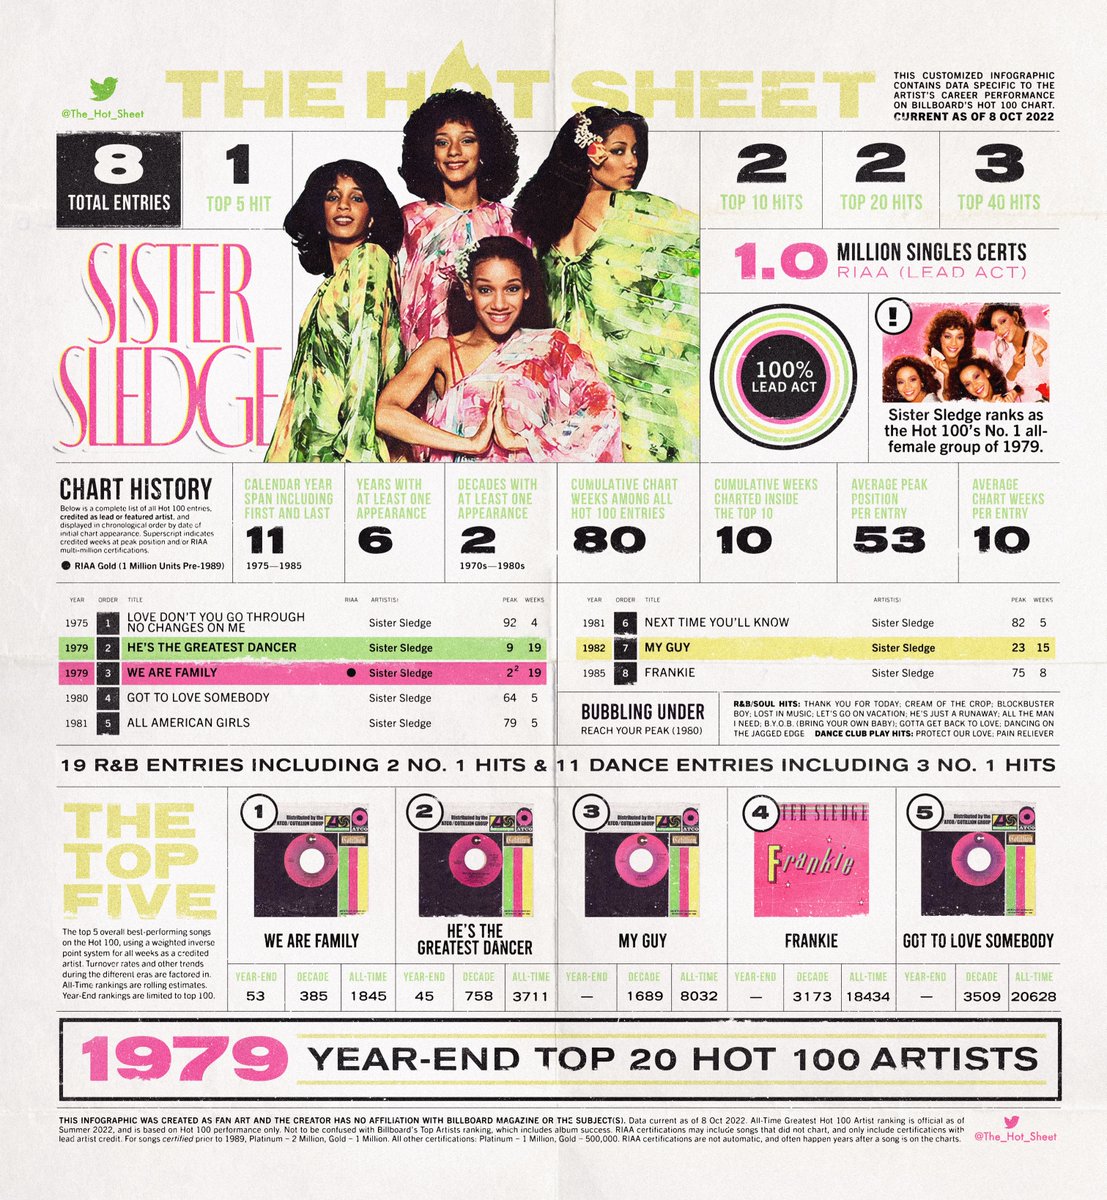 The Hot Sheet : SISTER SLEDGE (@SisterSledge_) : Billboard Hot 100 Chart History : Press/hold image to view in 4K hi-res on smartphones : #SisterSledge #WeAreFamily